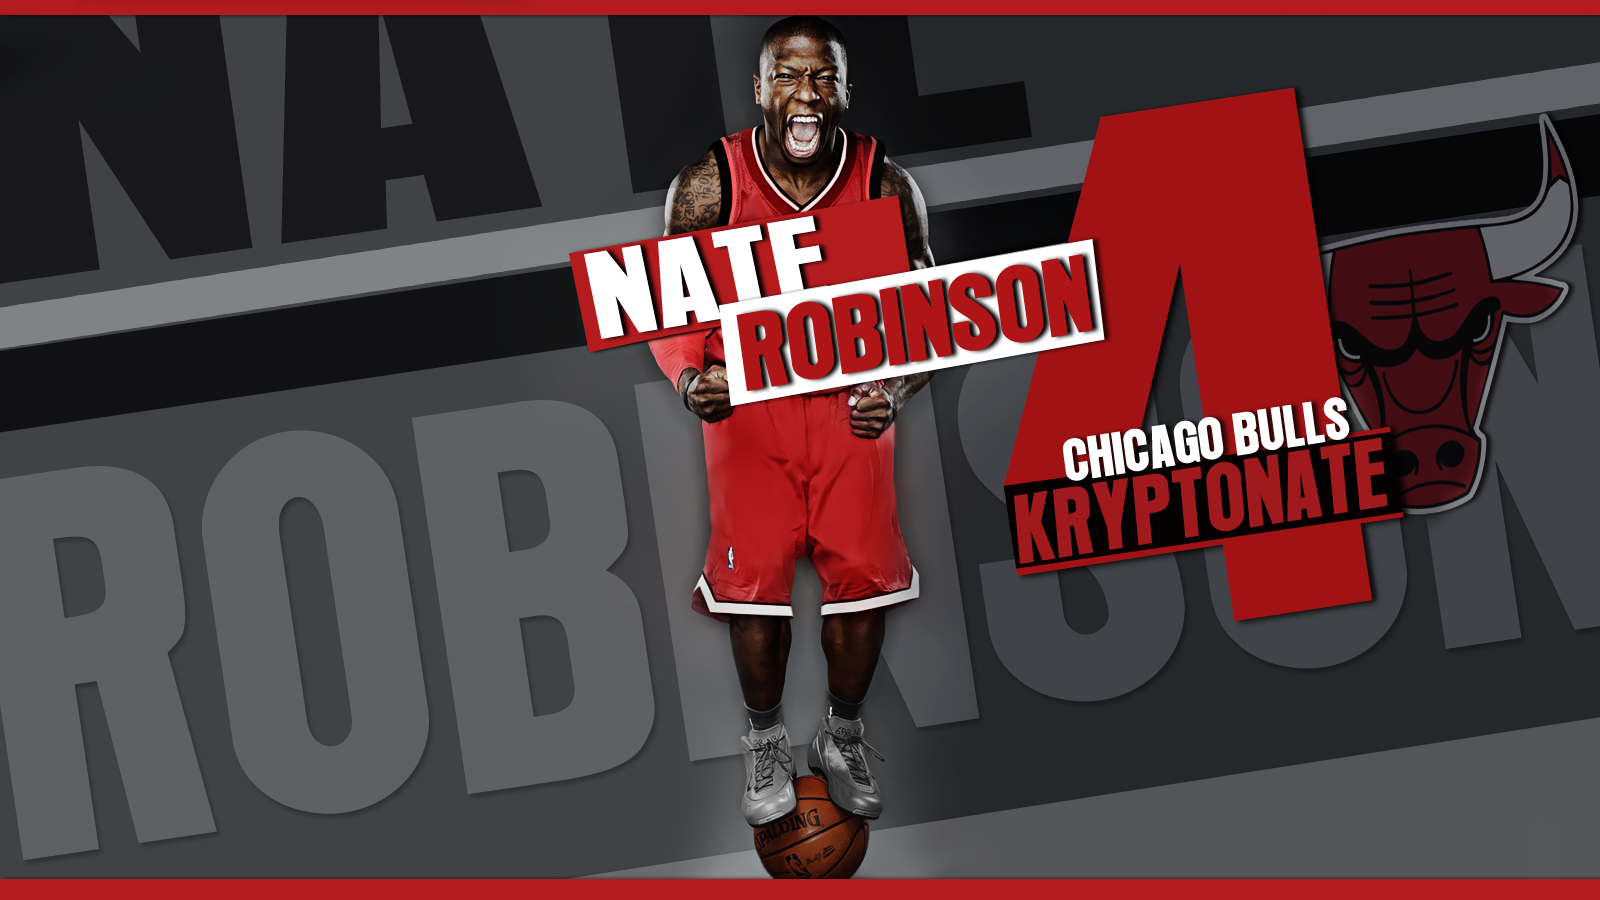 Nate robinson Red wallpaper cute Backgrounds